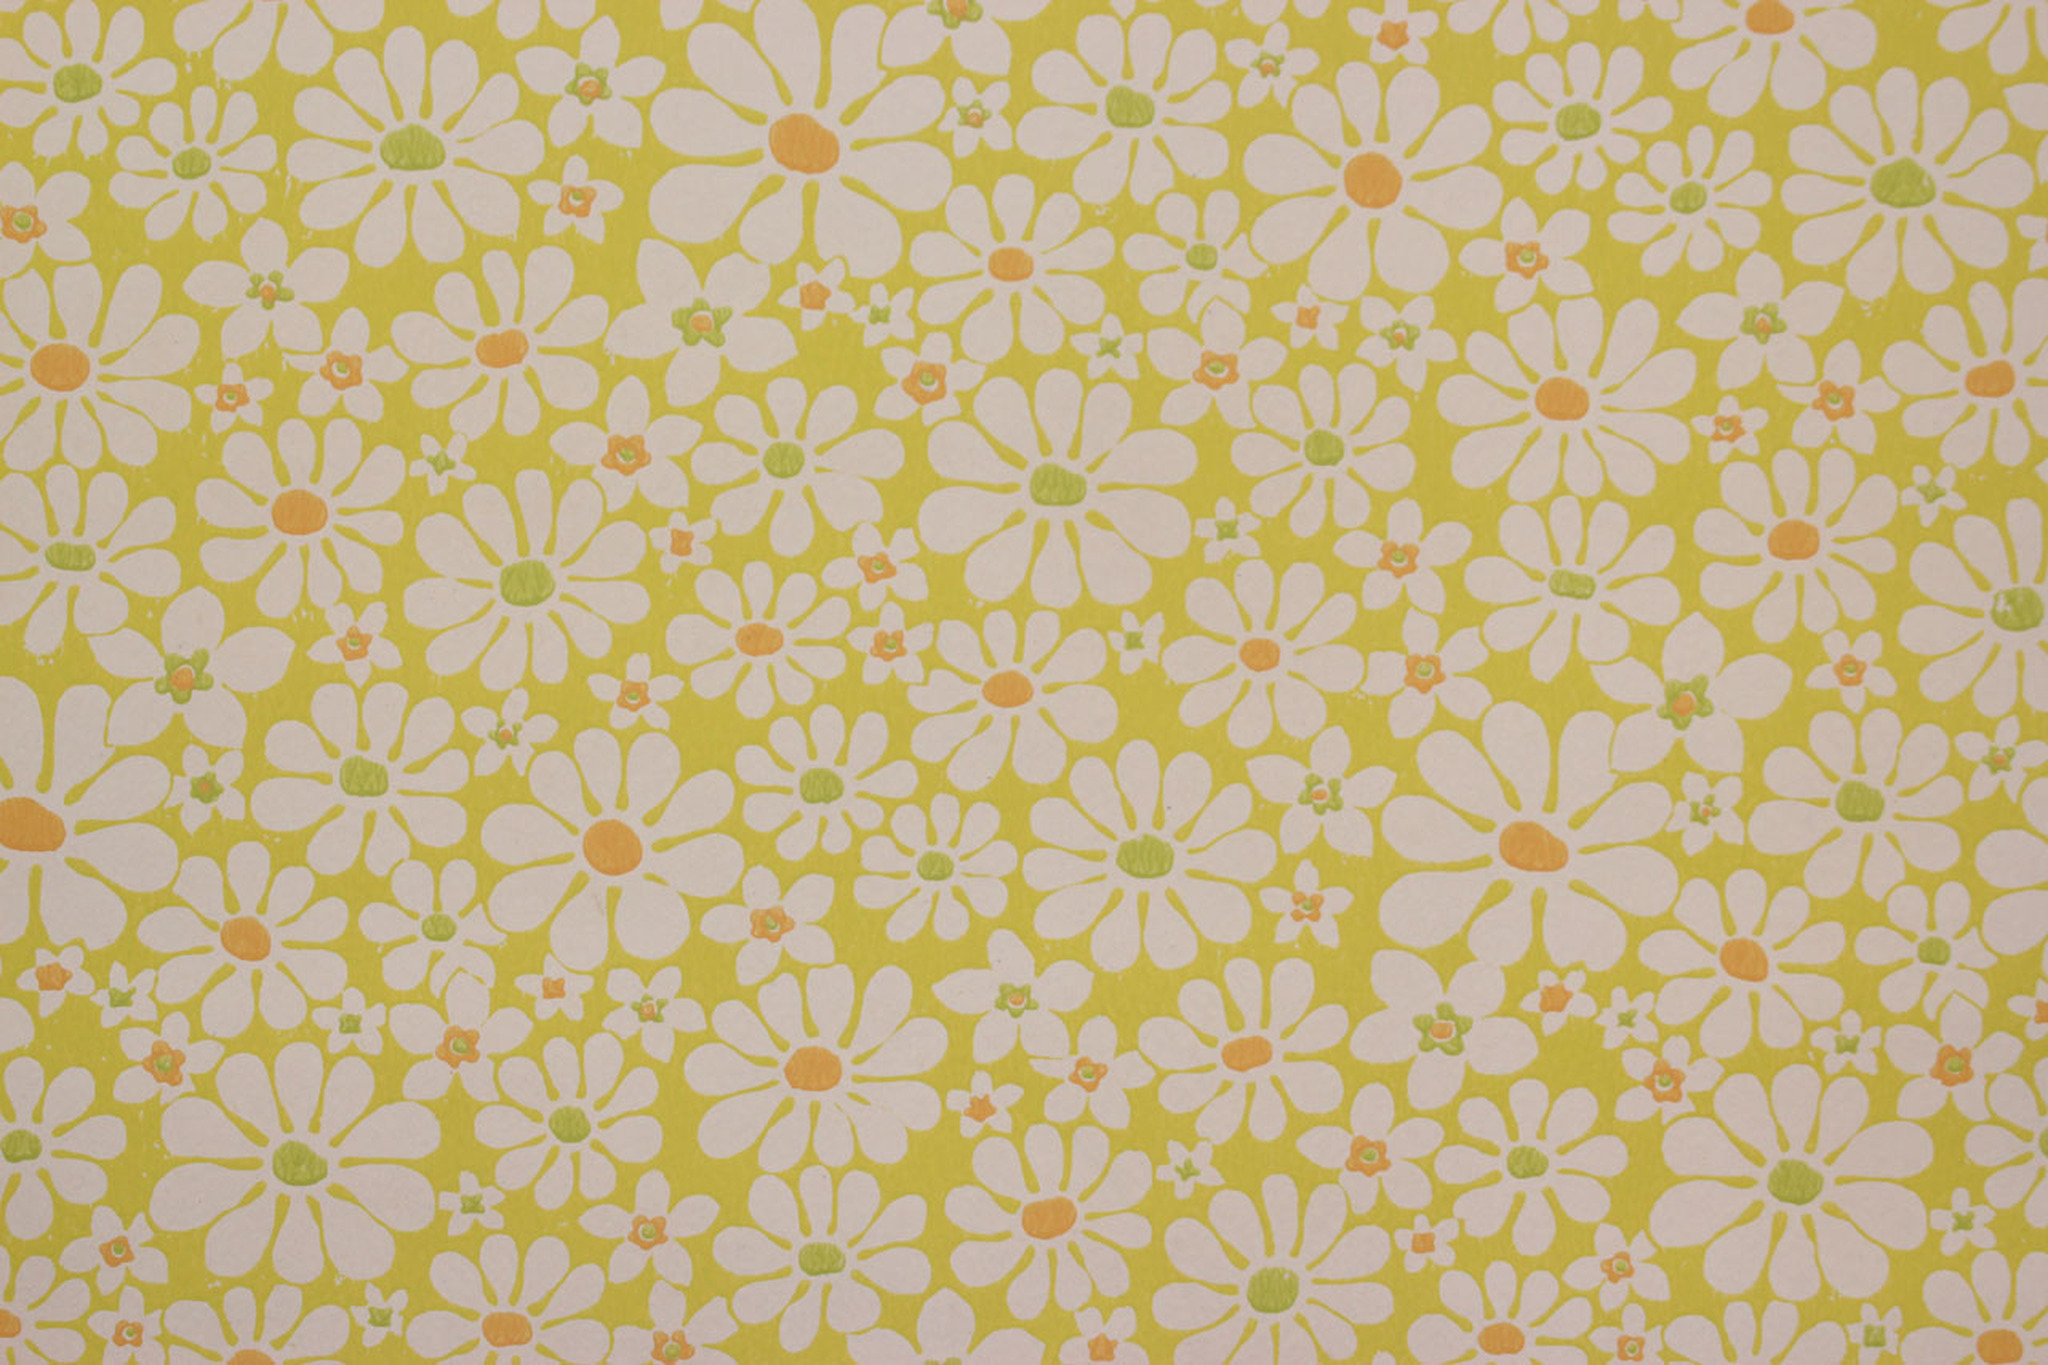 1970s Vintage Wallpaper White Daisies on Yellow Bright Centers's Vintage Wallpaper